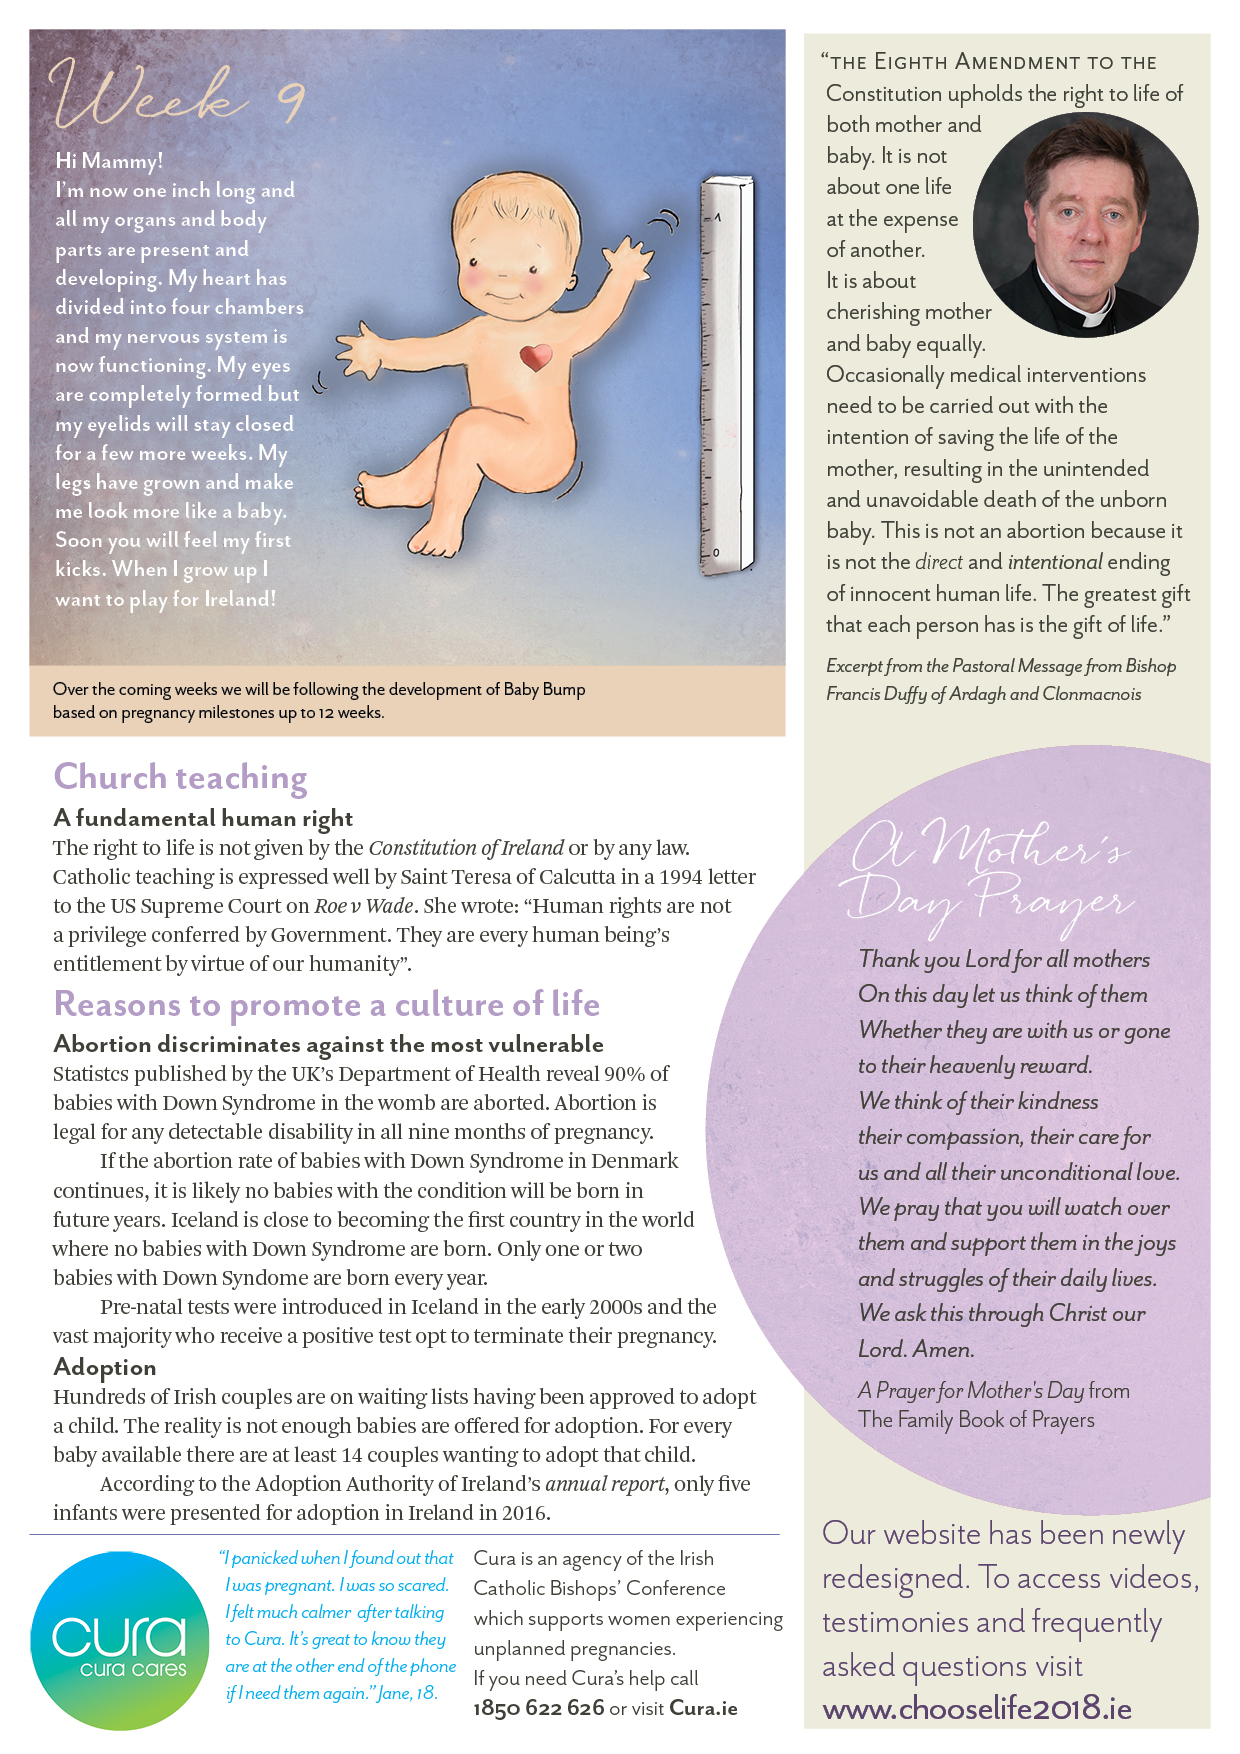 ChooseLife2018_Issue6_p2